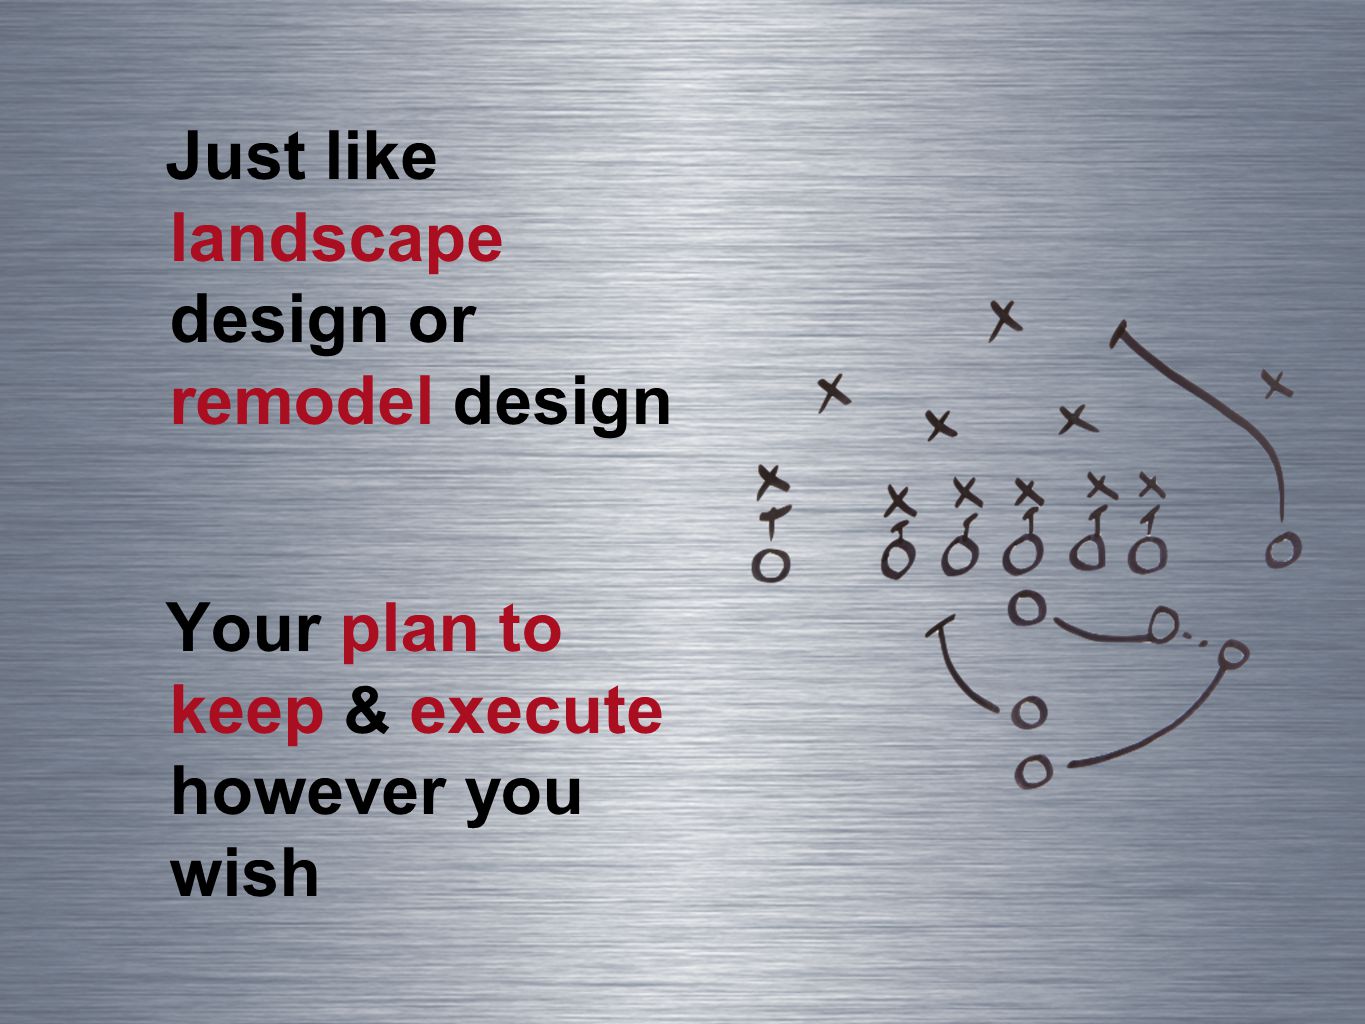 Just like landscape design or remodel design Your plan to keep & execute however you wish